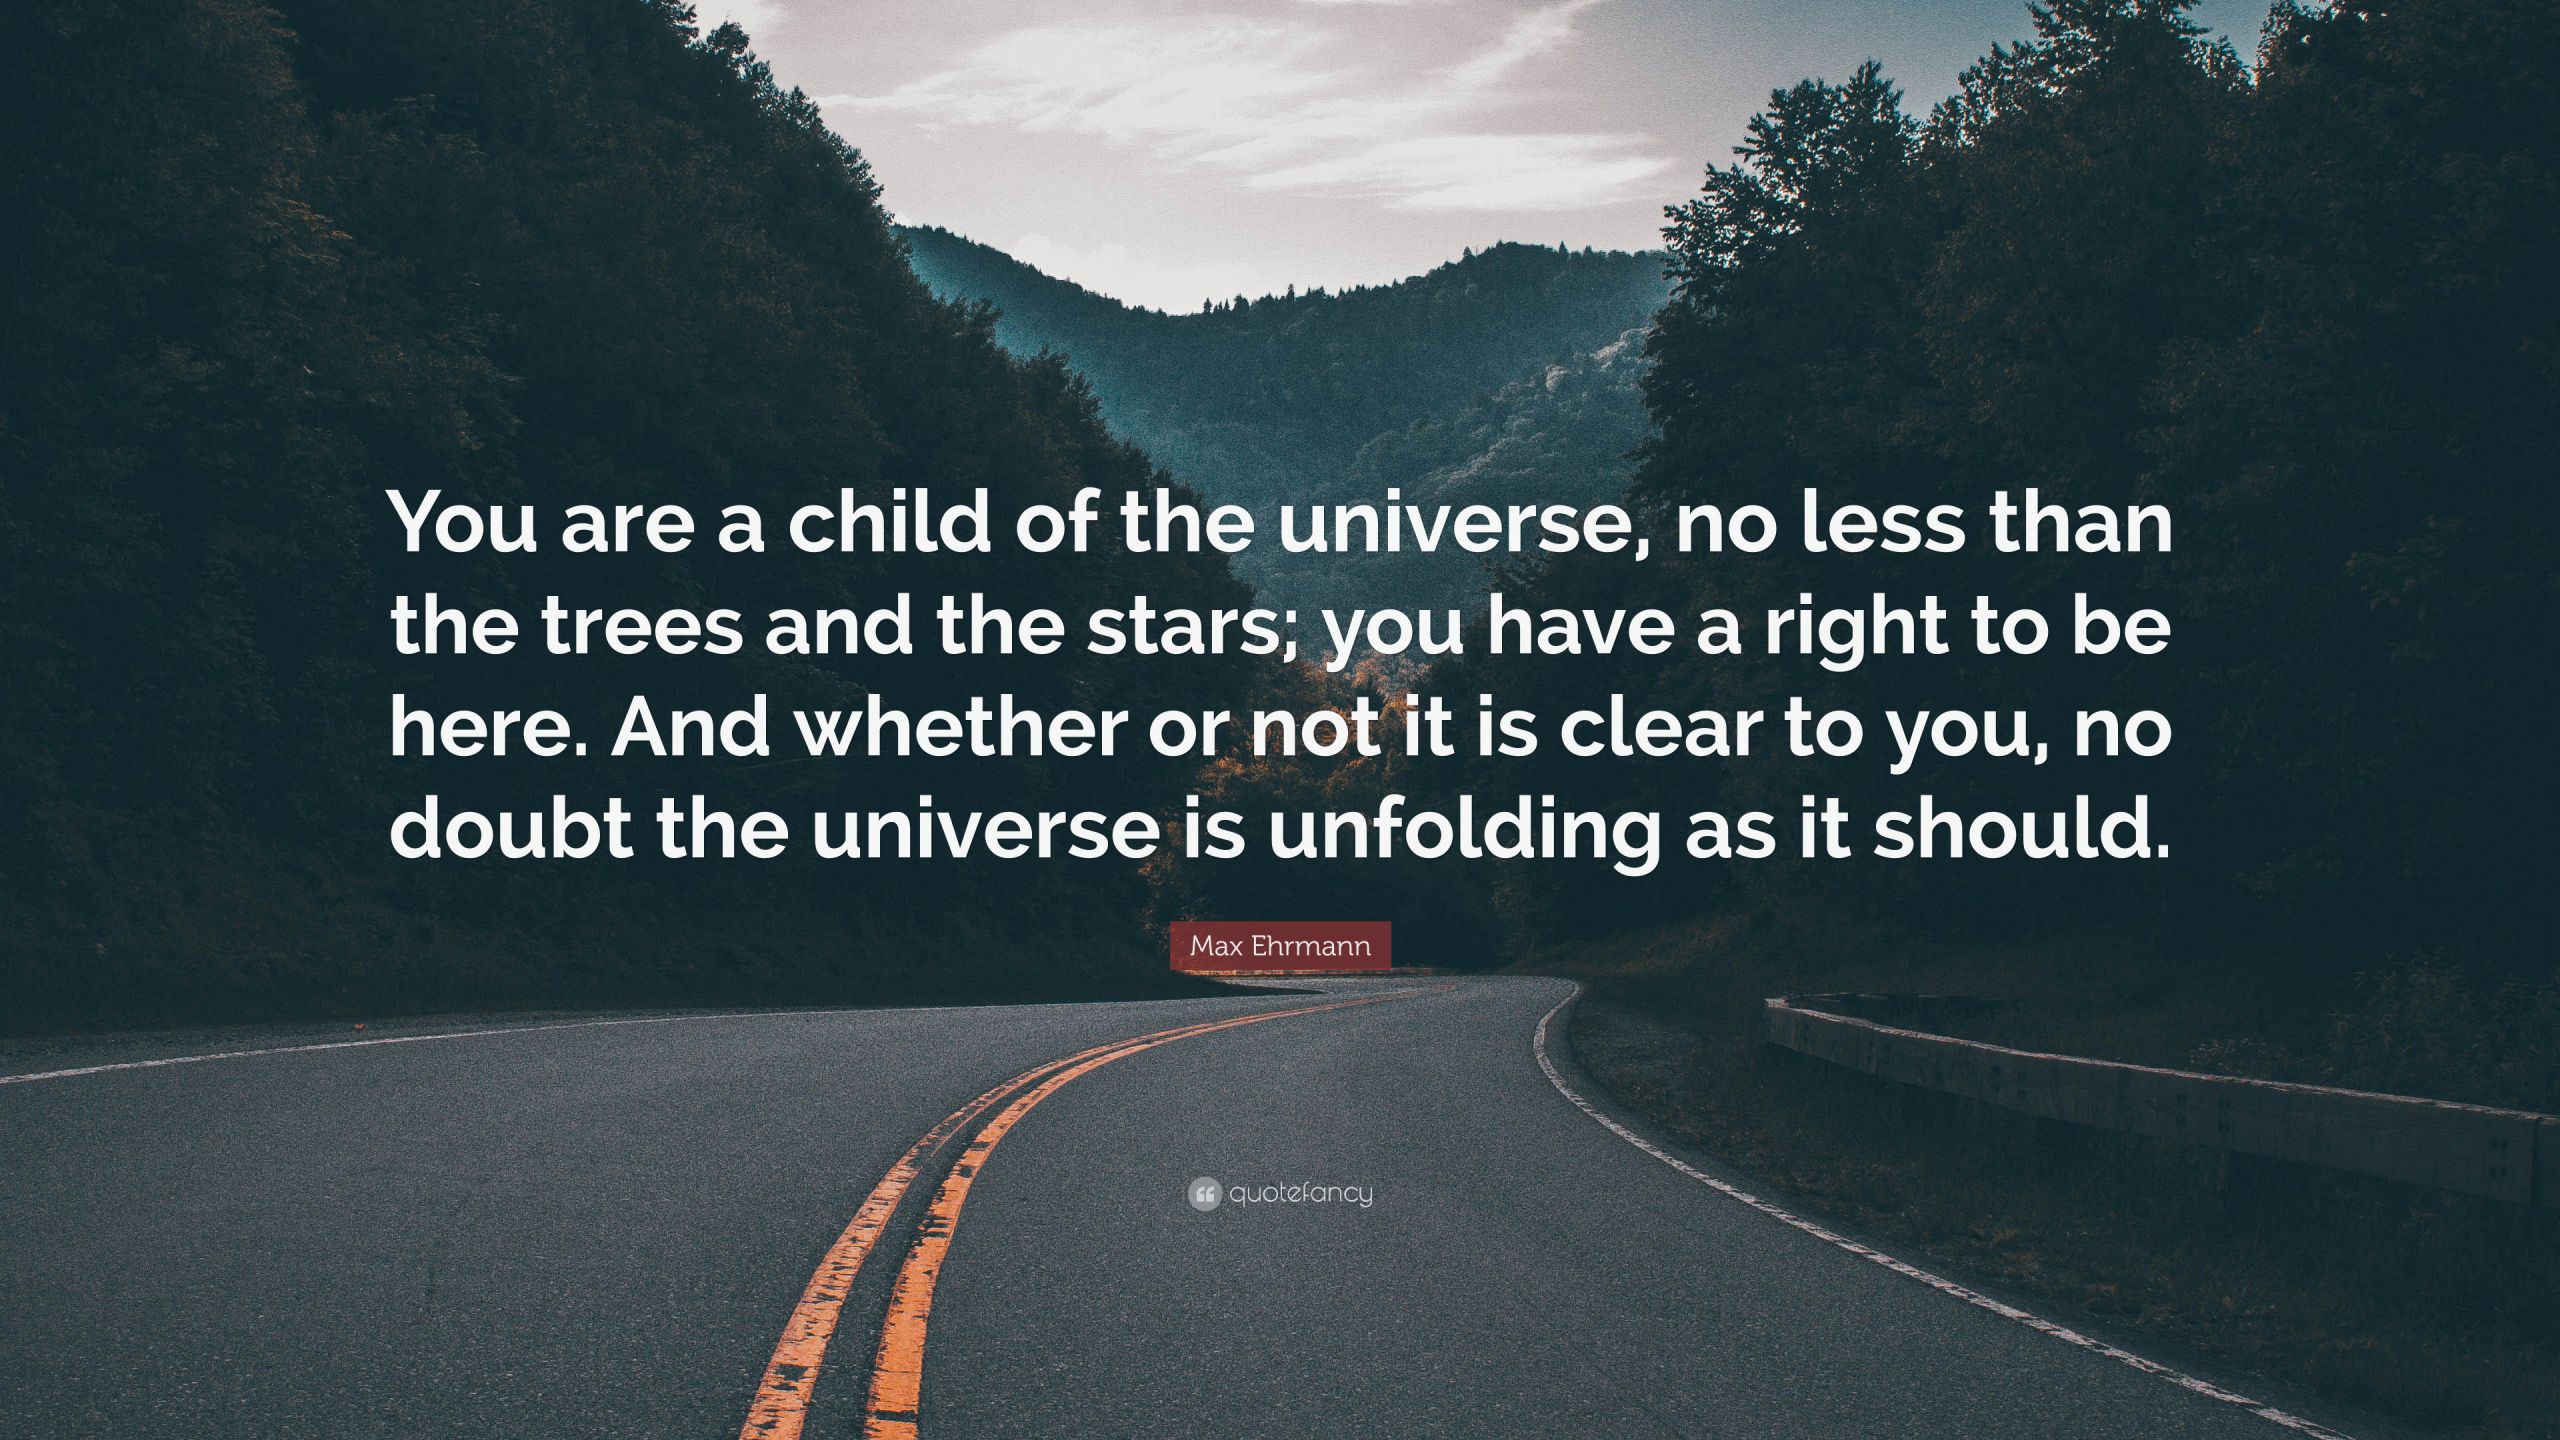 You Are A Child Of The Universe Quote
 Max Ehrmann Quote “You are a child of the universe no